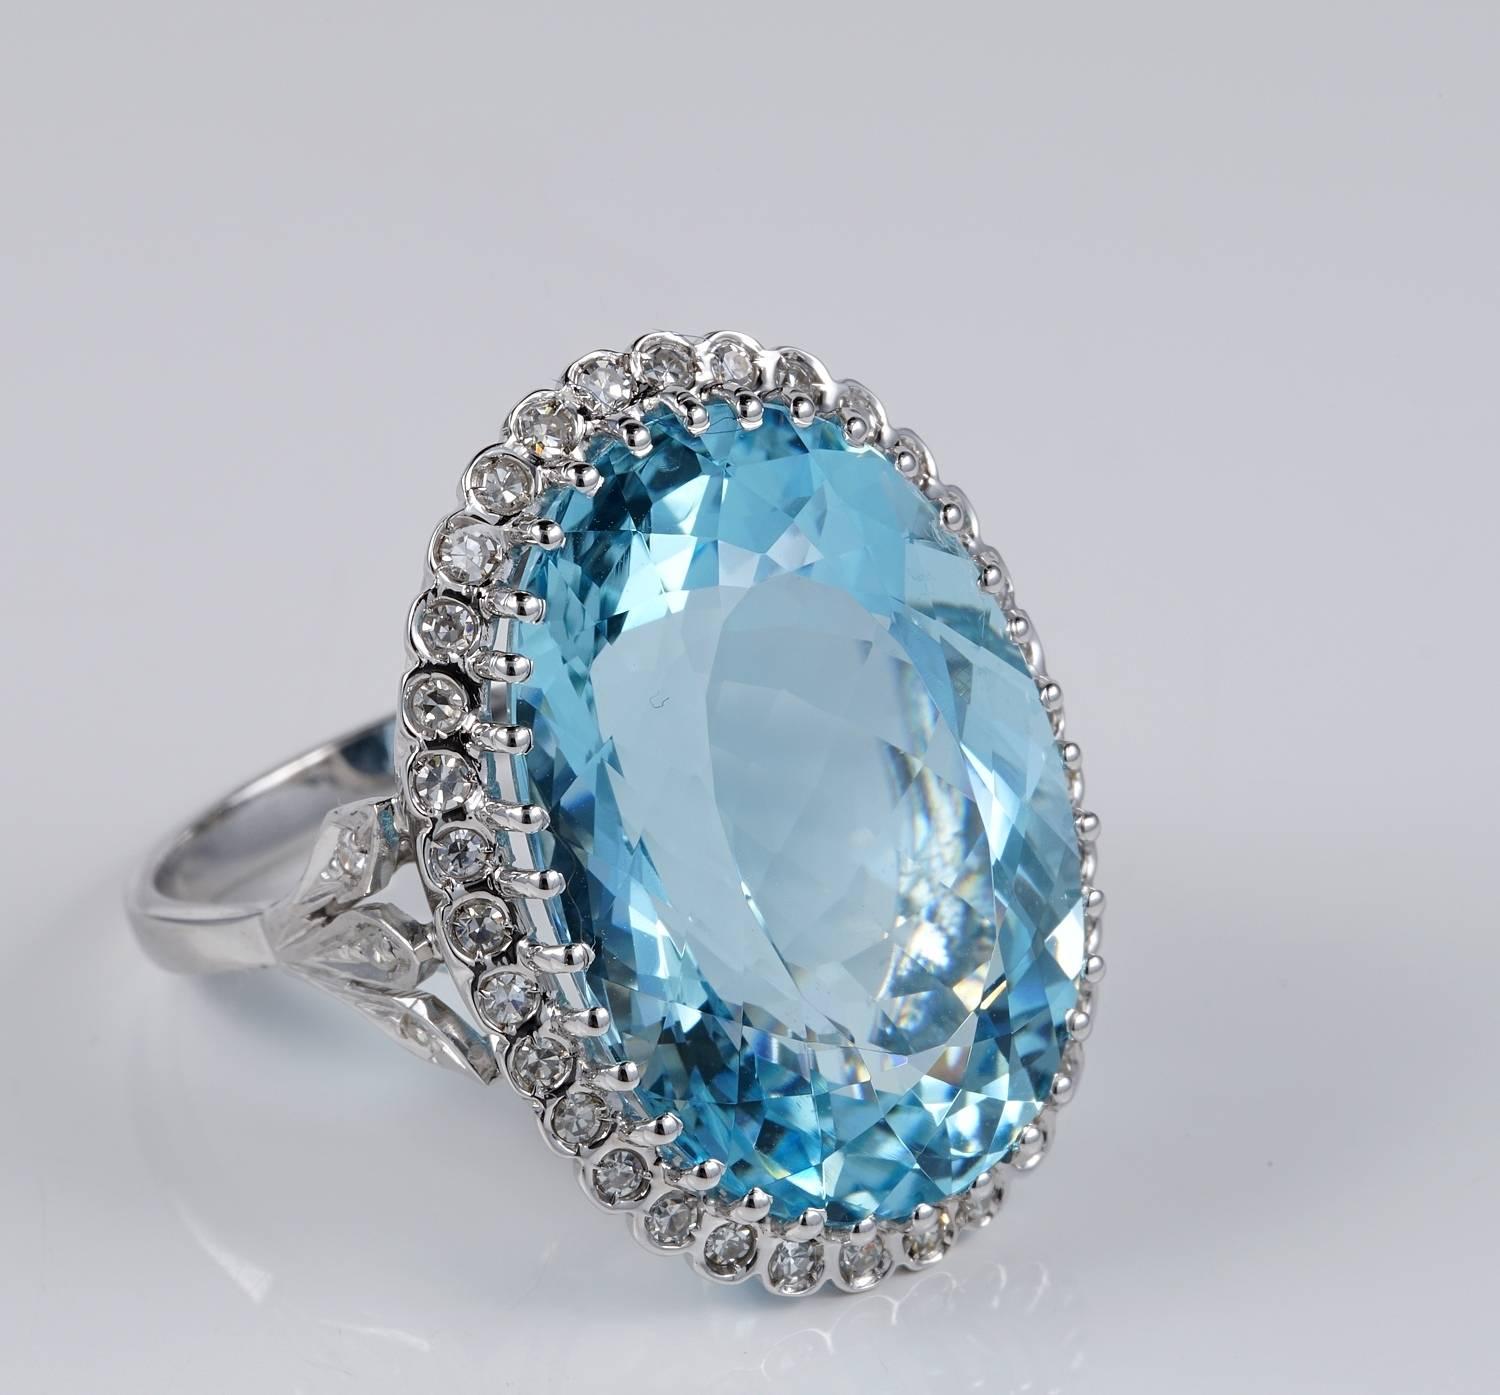 Jumbo sized Natural Aquamarine & Diamond vintage ring dating back to 1950 ca
Stunning cluster ring boasting a 100% Natural Aquamarine of bright and lively intense sky blue hue finely oval faceted 27.0 Carat in weight
Complemented by a garland of .70